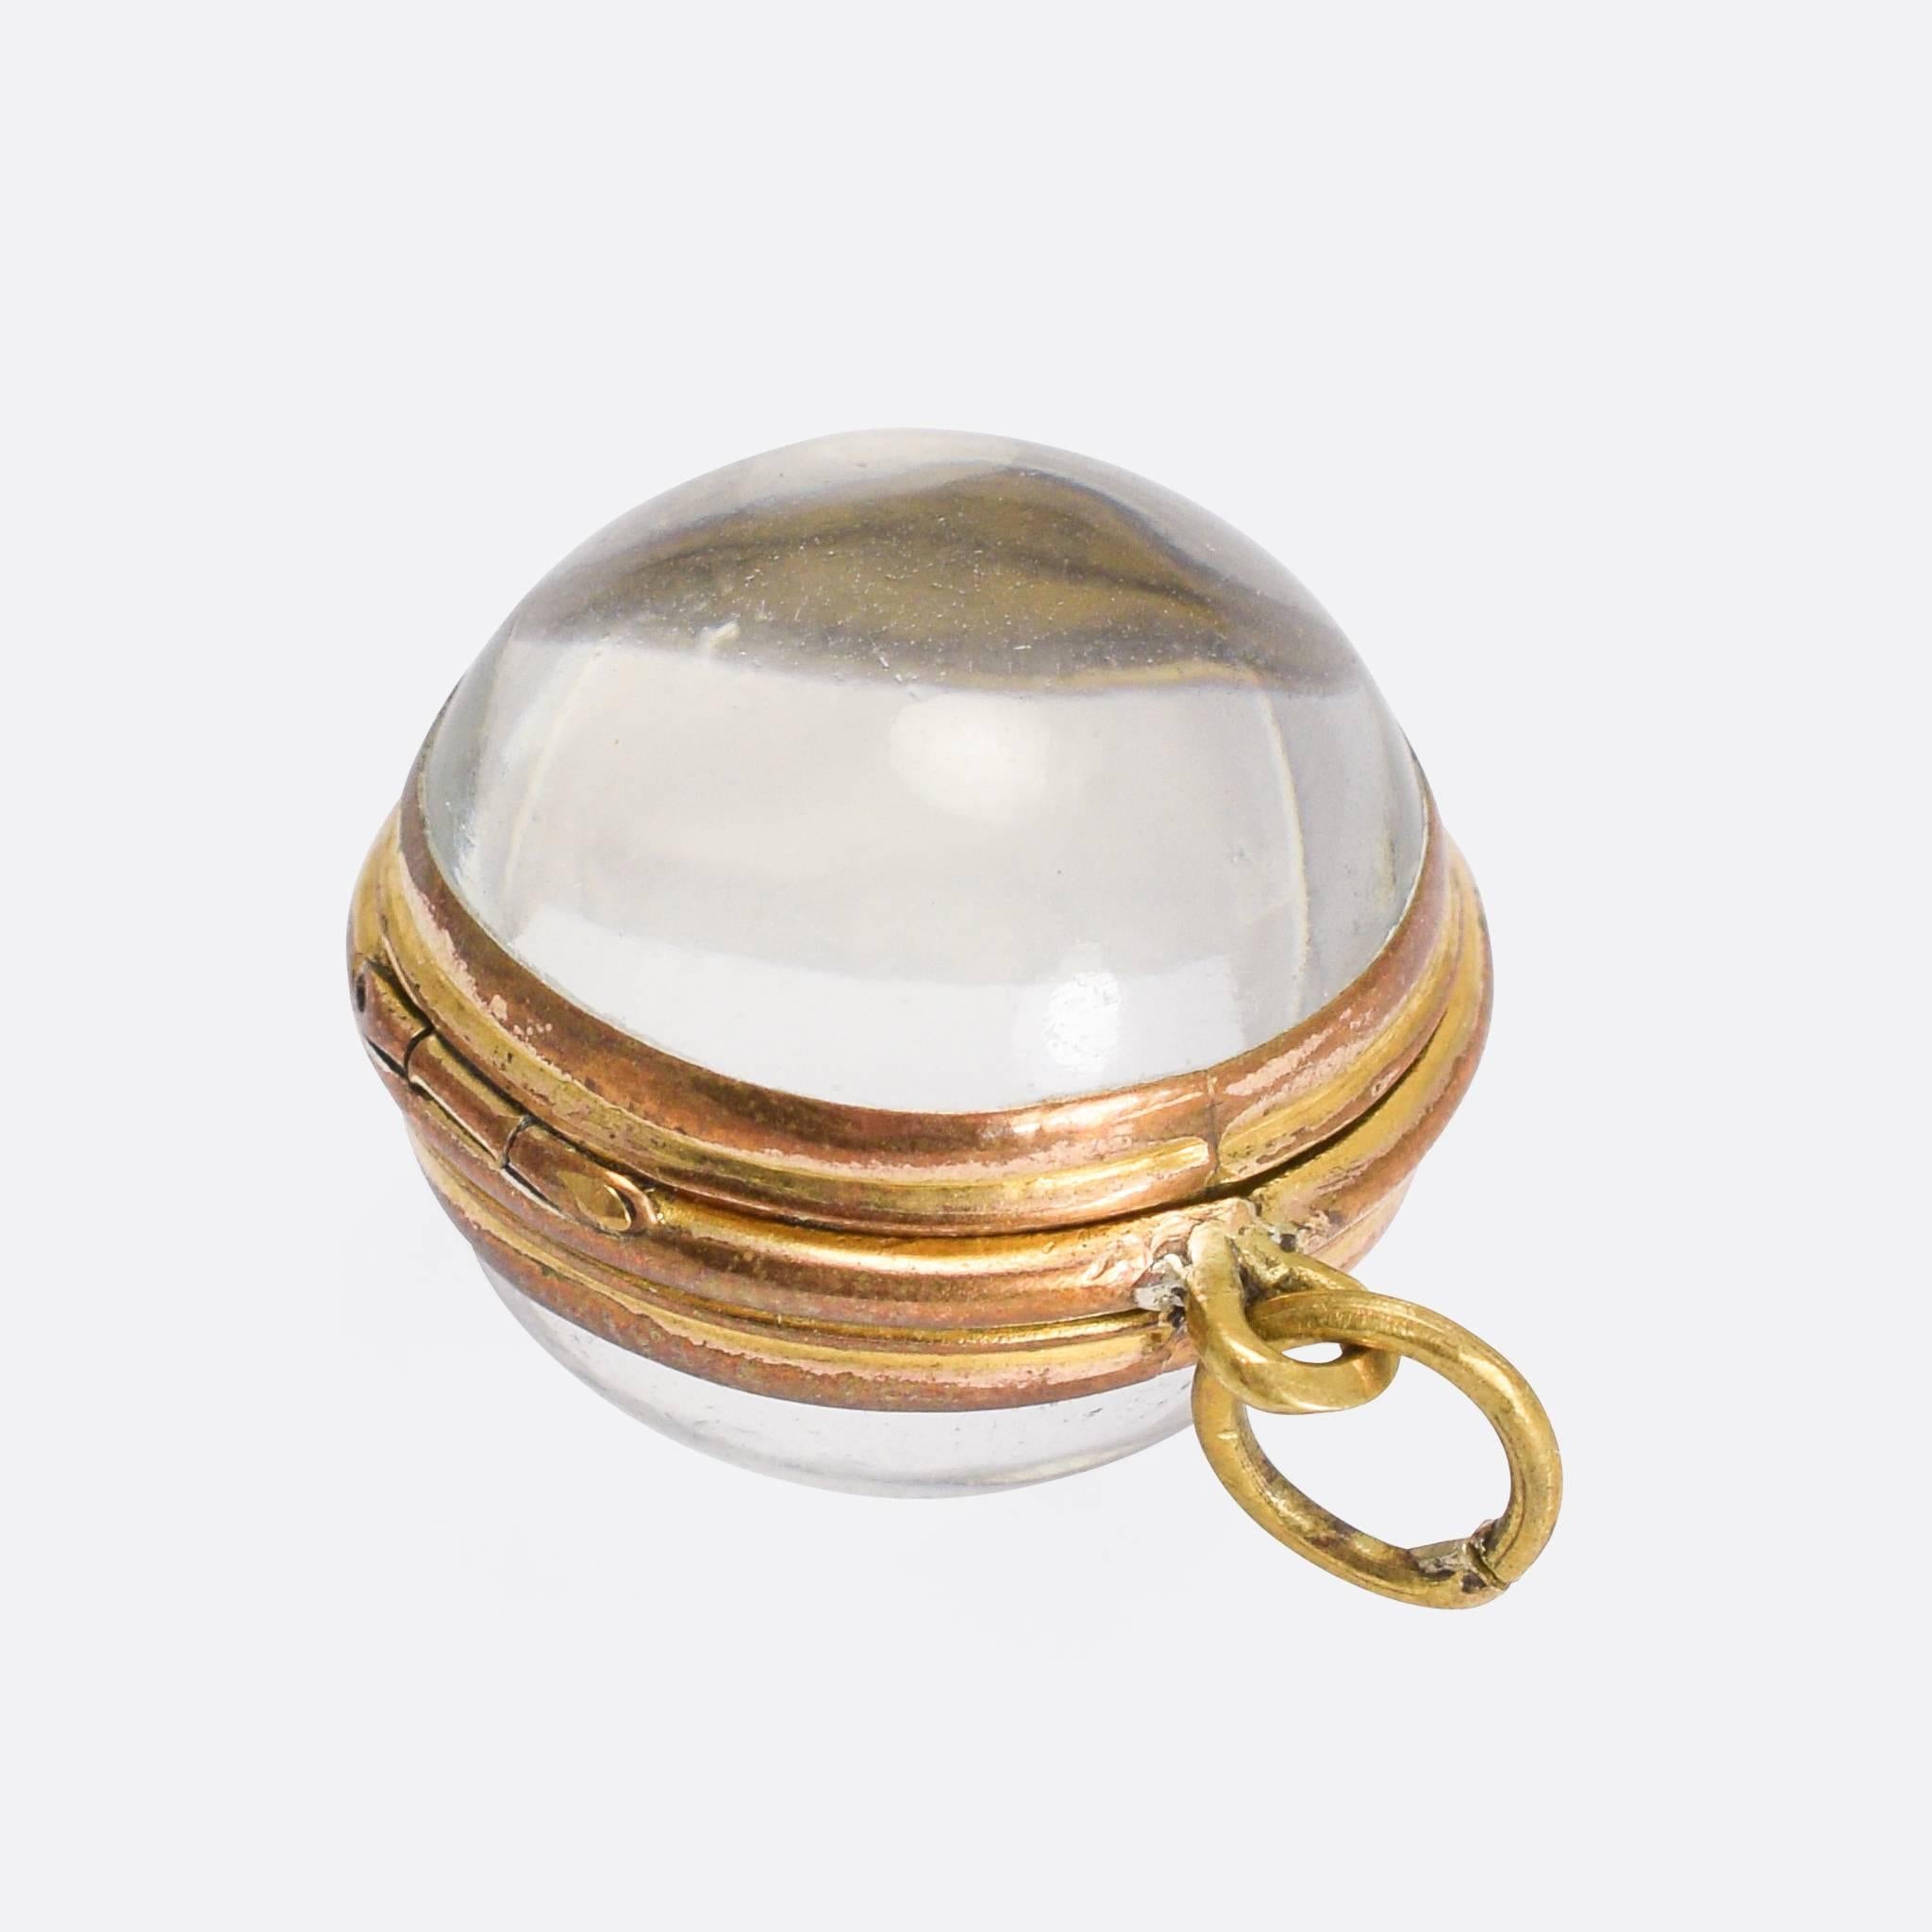 A beautiful Victorian pool-of-light locket. Comprising two rock crystal hemispheres, the piece is hinged down one side and opens up to store a photograph or other keepsake. The real beauty of the piece is the way that it captures and focuses the